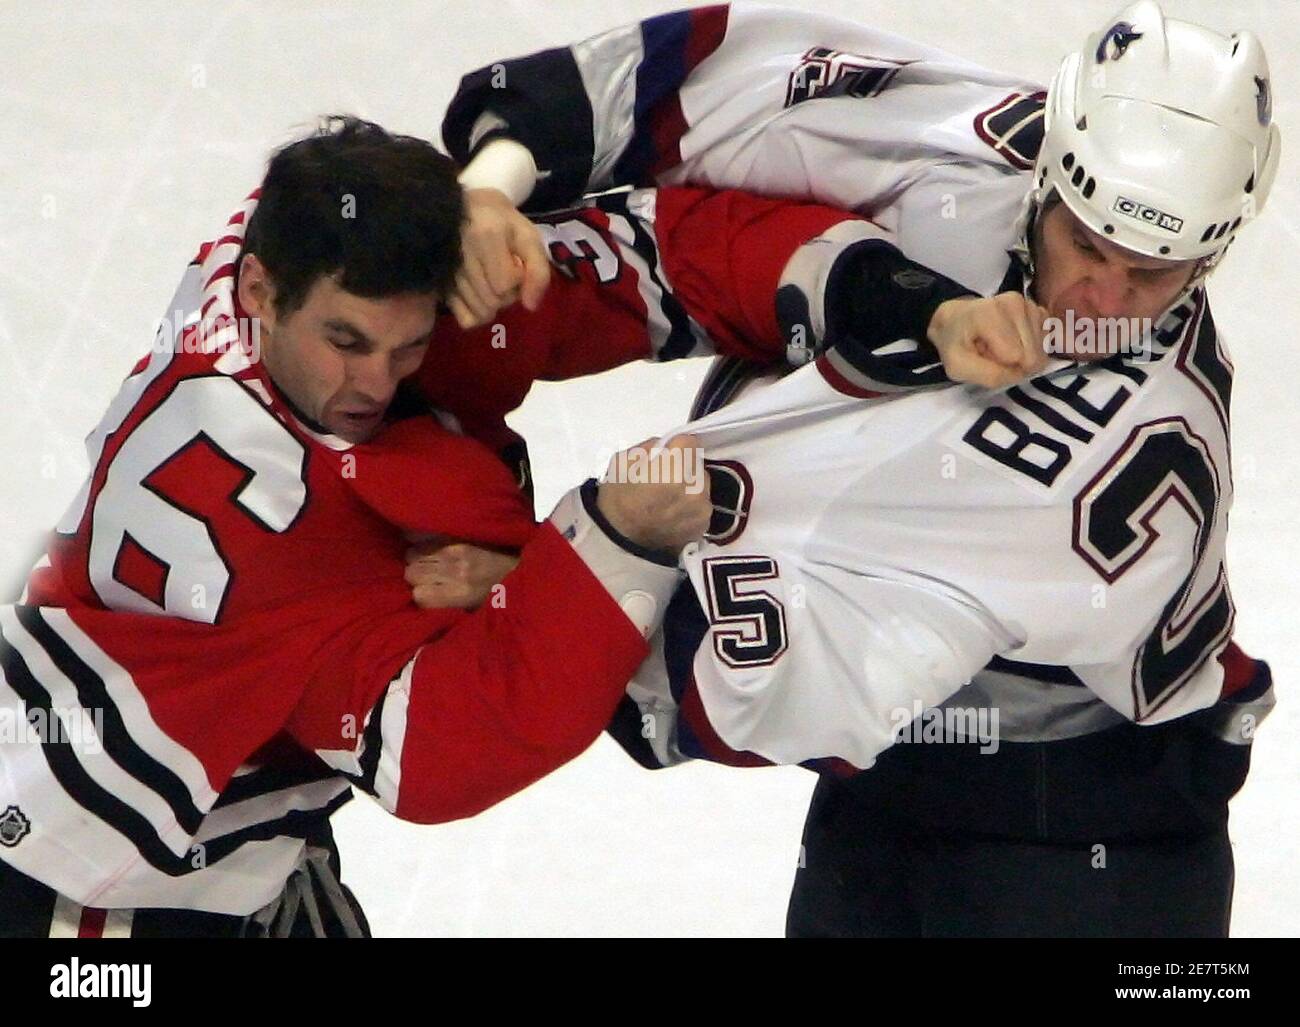 vancouver-canucks-defenseman-kevin-bieksa-r-and-chicago-blackhawks-forward-matthew-barnaby-fight-moments-after-the-start-of-their-game-in-chicago-january-5-2006-reutersfrank-polich-2E7T5KM.jpg